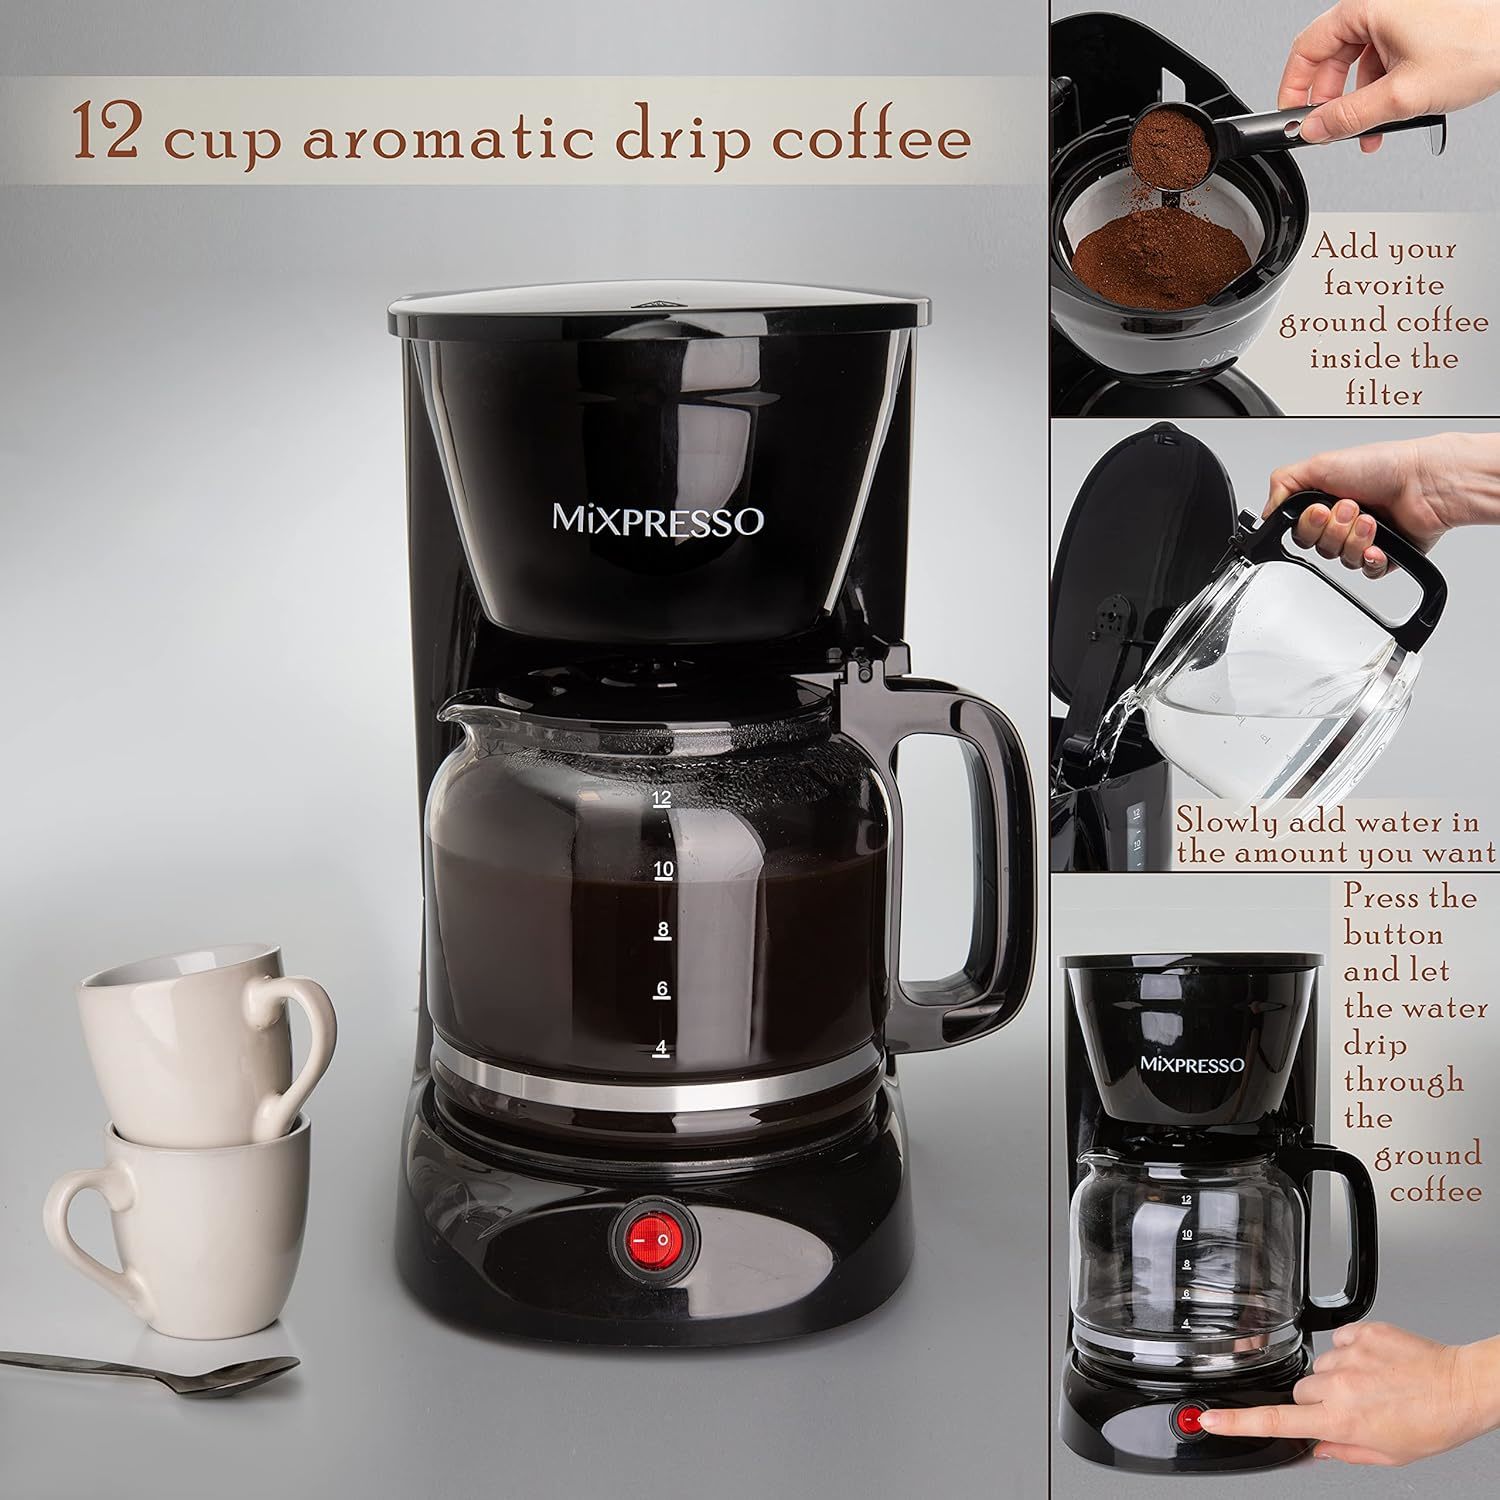 Mixpresso 12-Cup Drip Coffee Maker, Coffee and 19 similar items